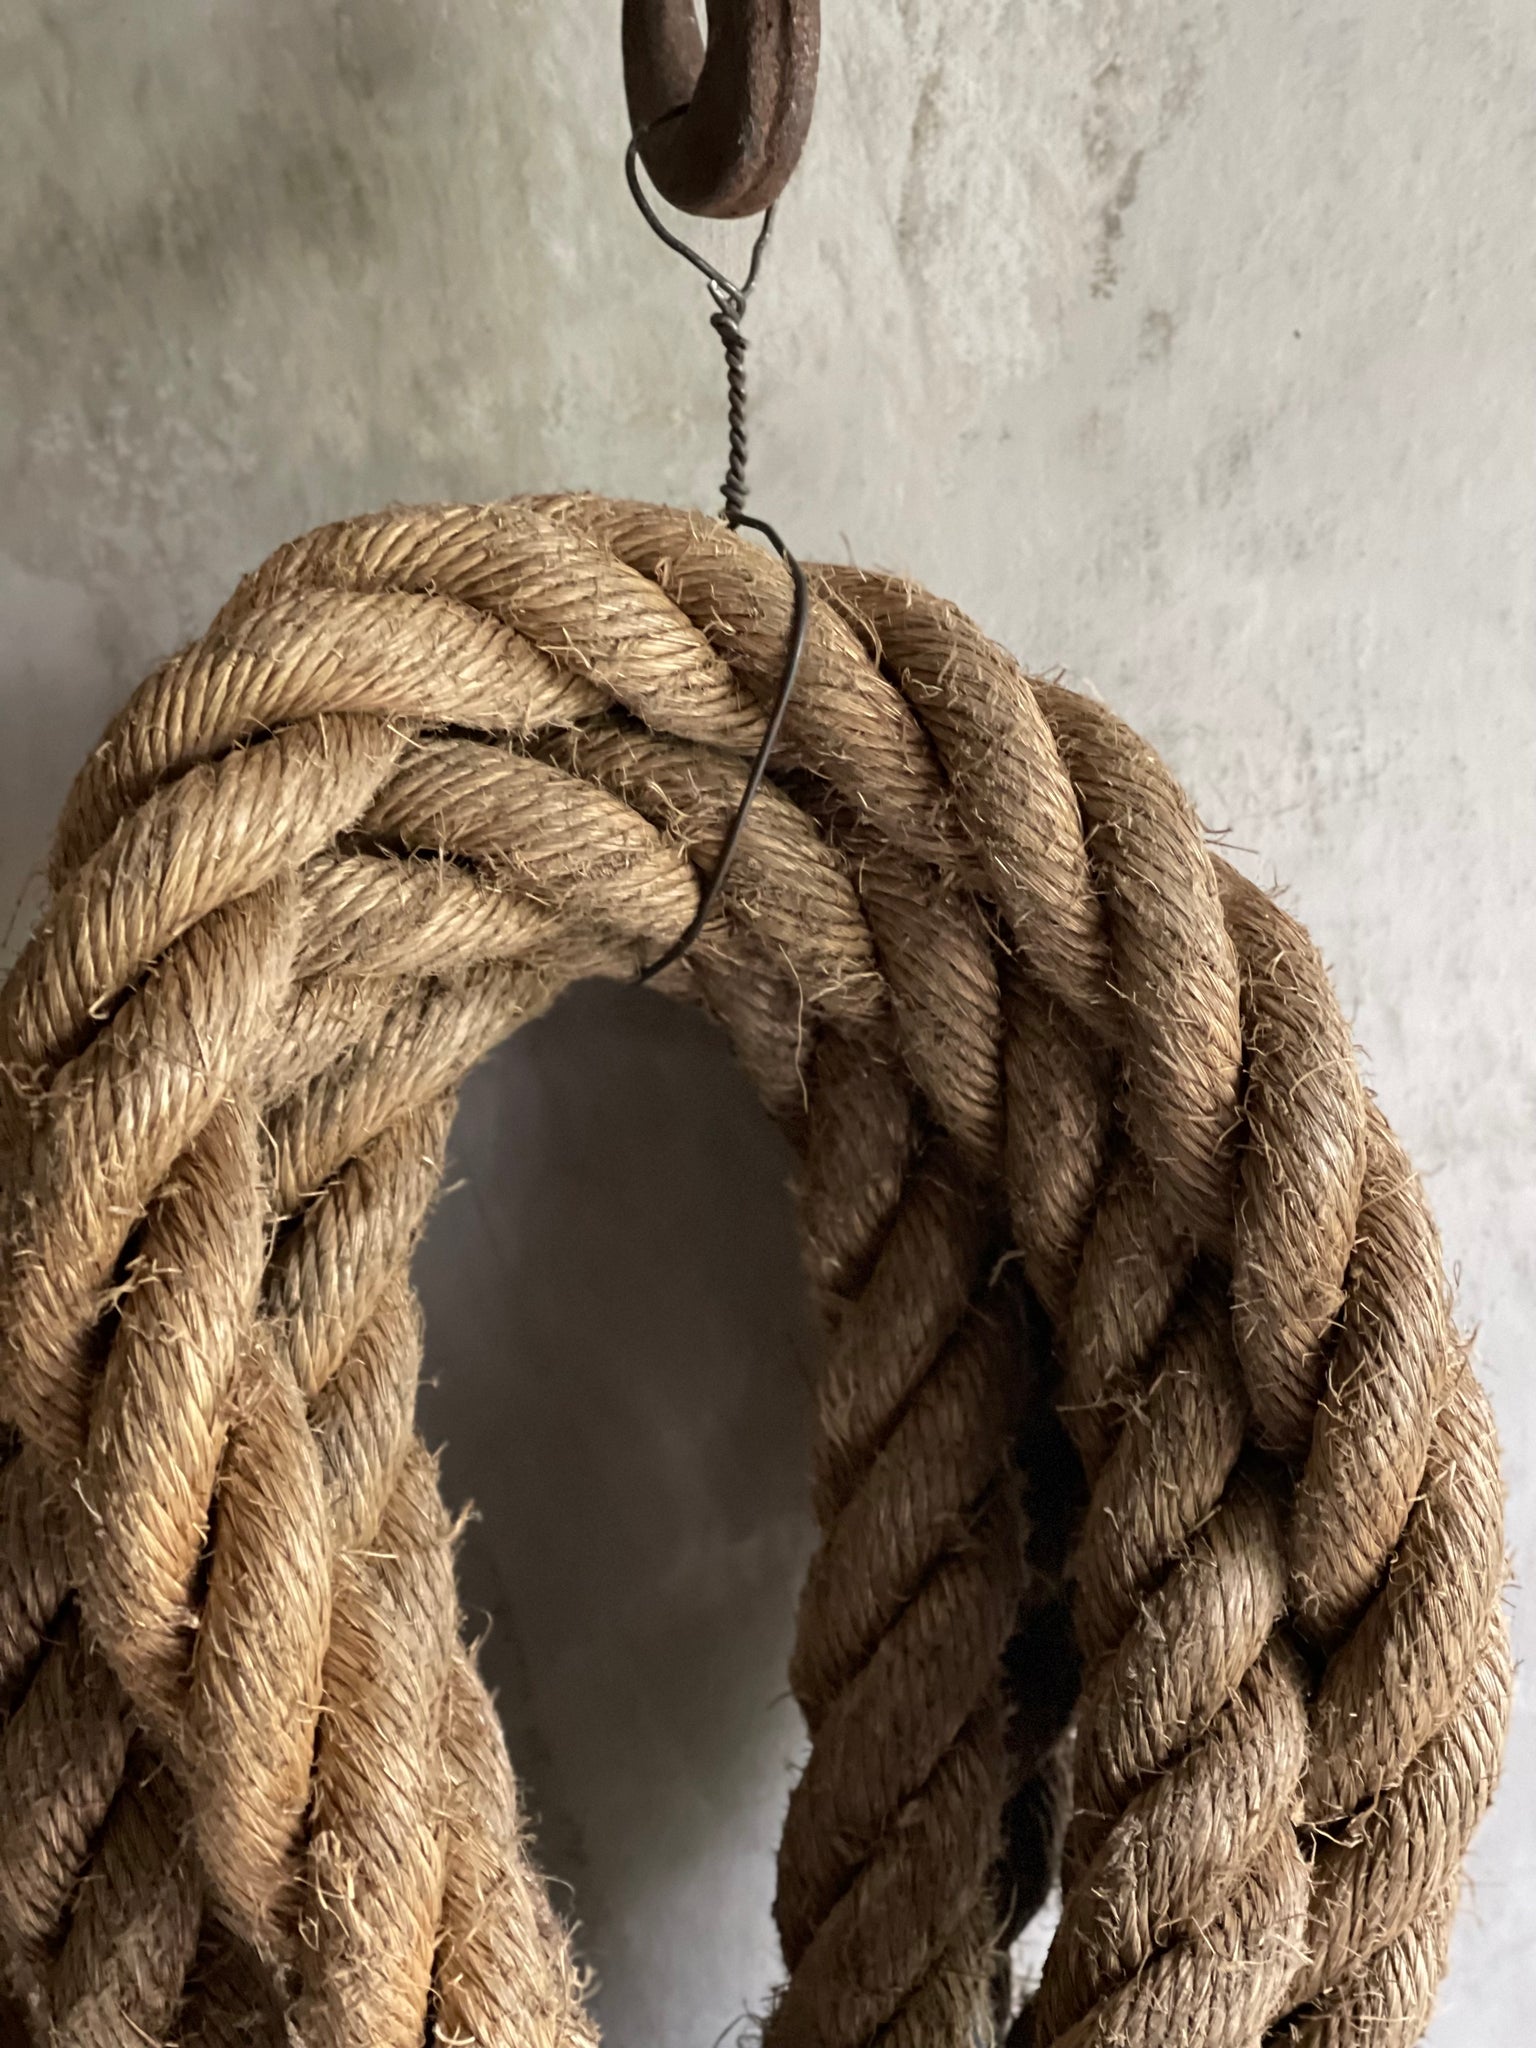 Wooden Pendant  2XL Nautical Rope in Raw Jute [Made in Italy